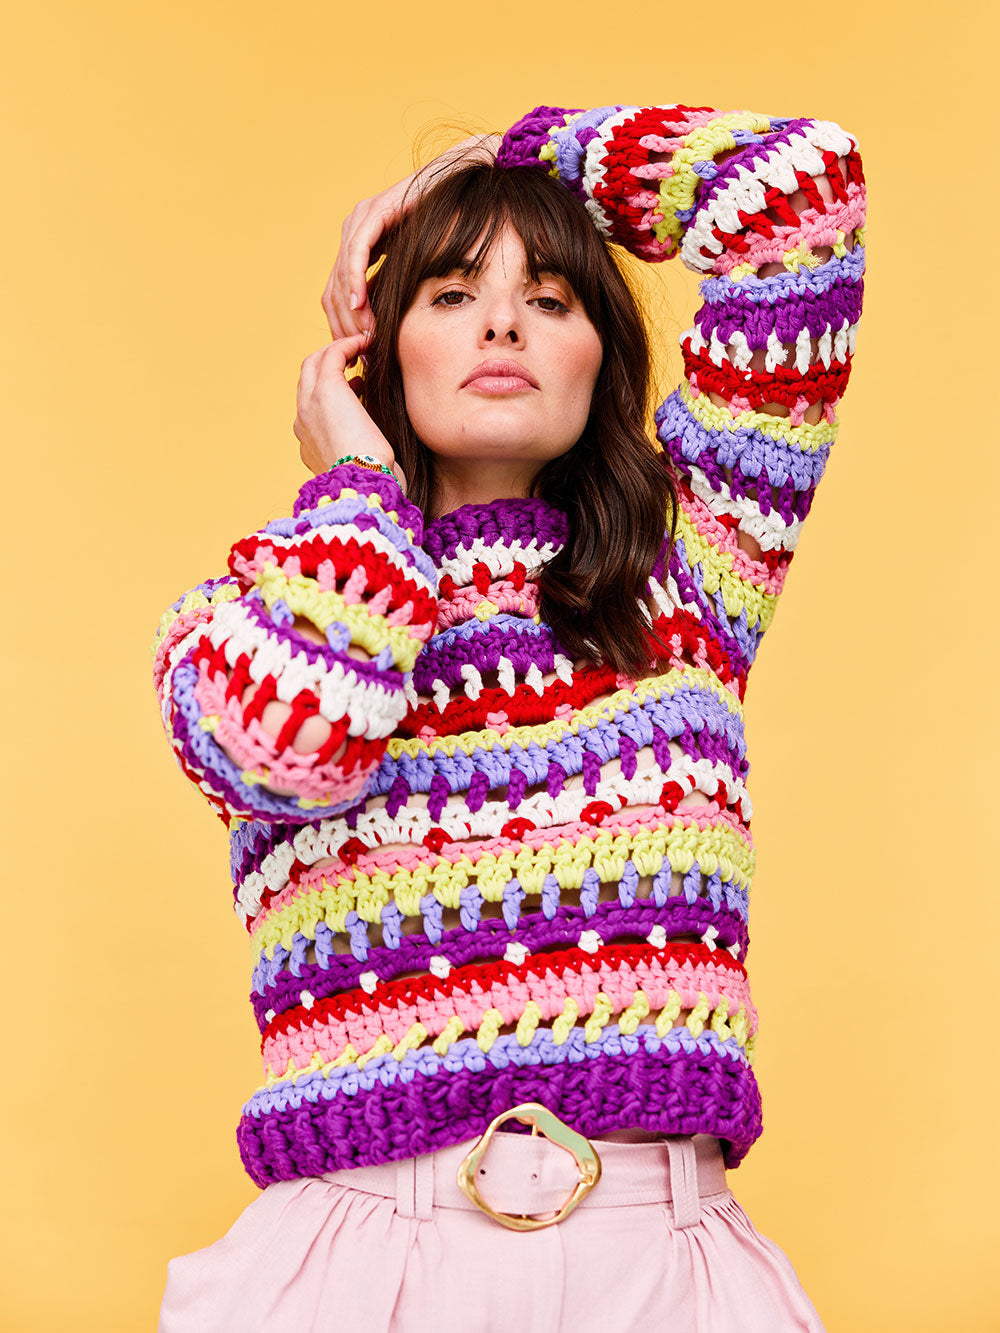 Woman with dark wavy hair is sitting on a lilac stool wearing a DIY striped crochet jumper by Cardigang